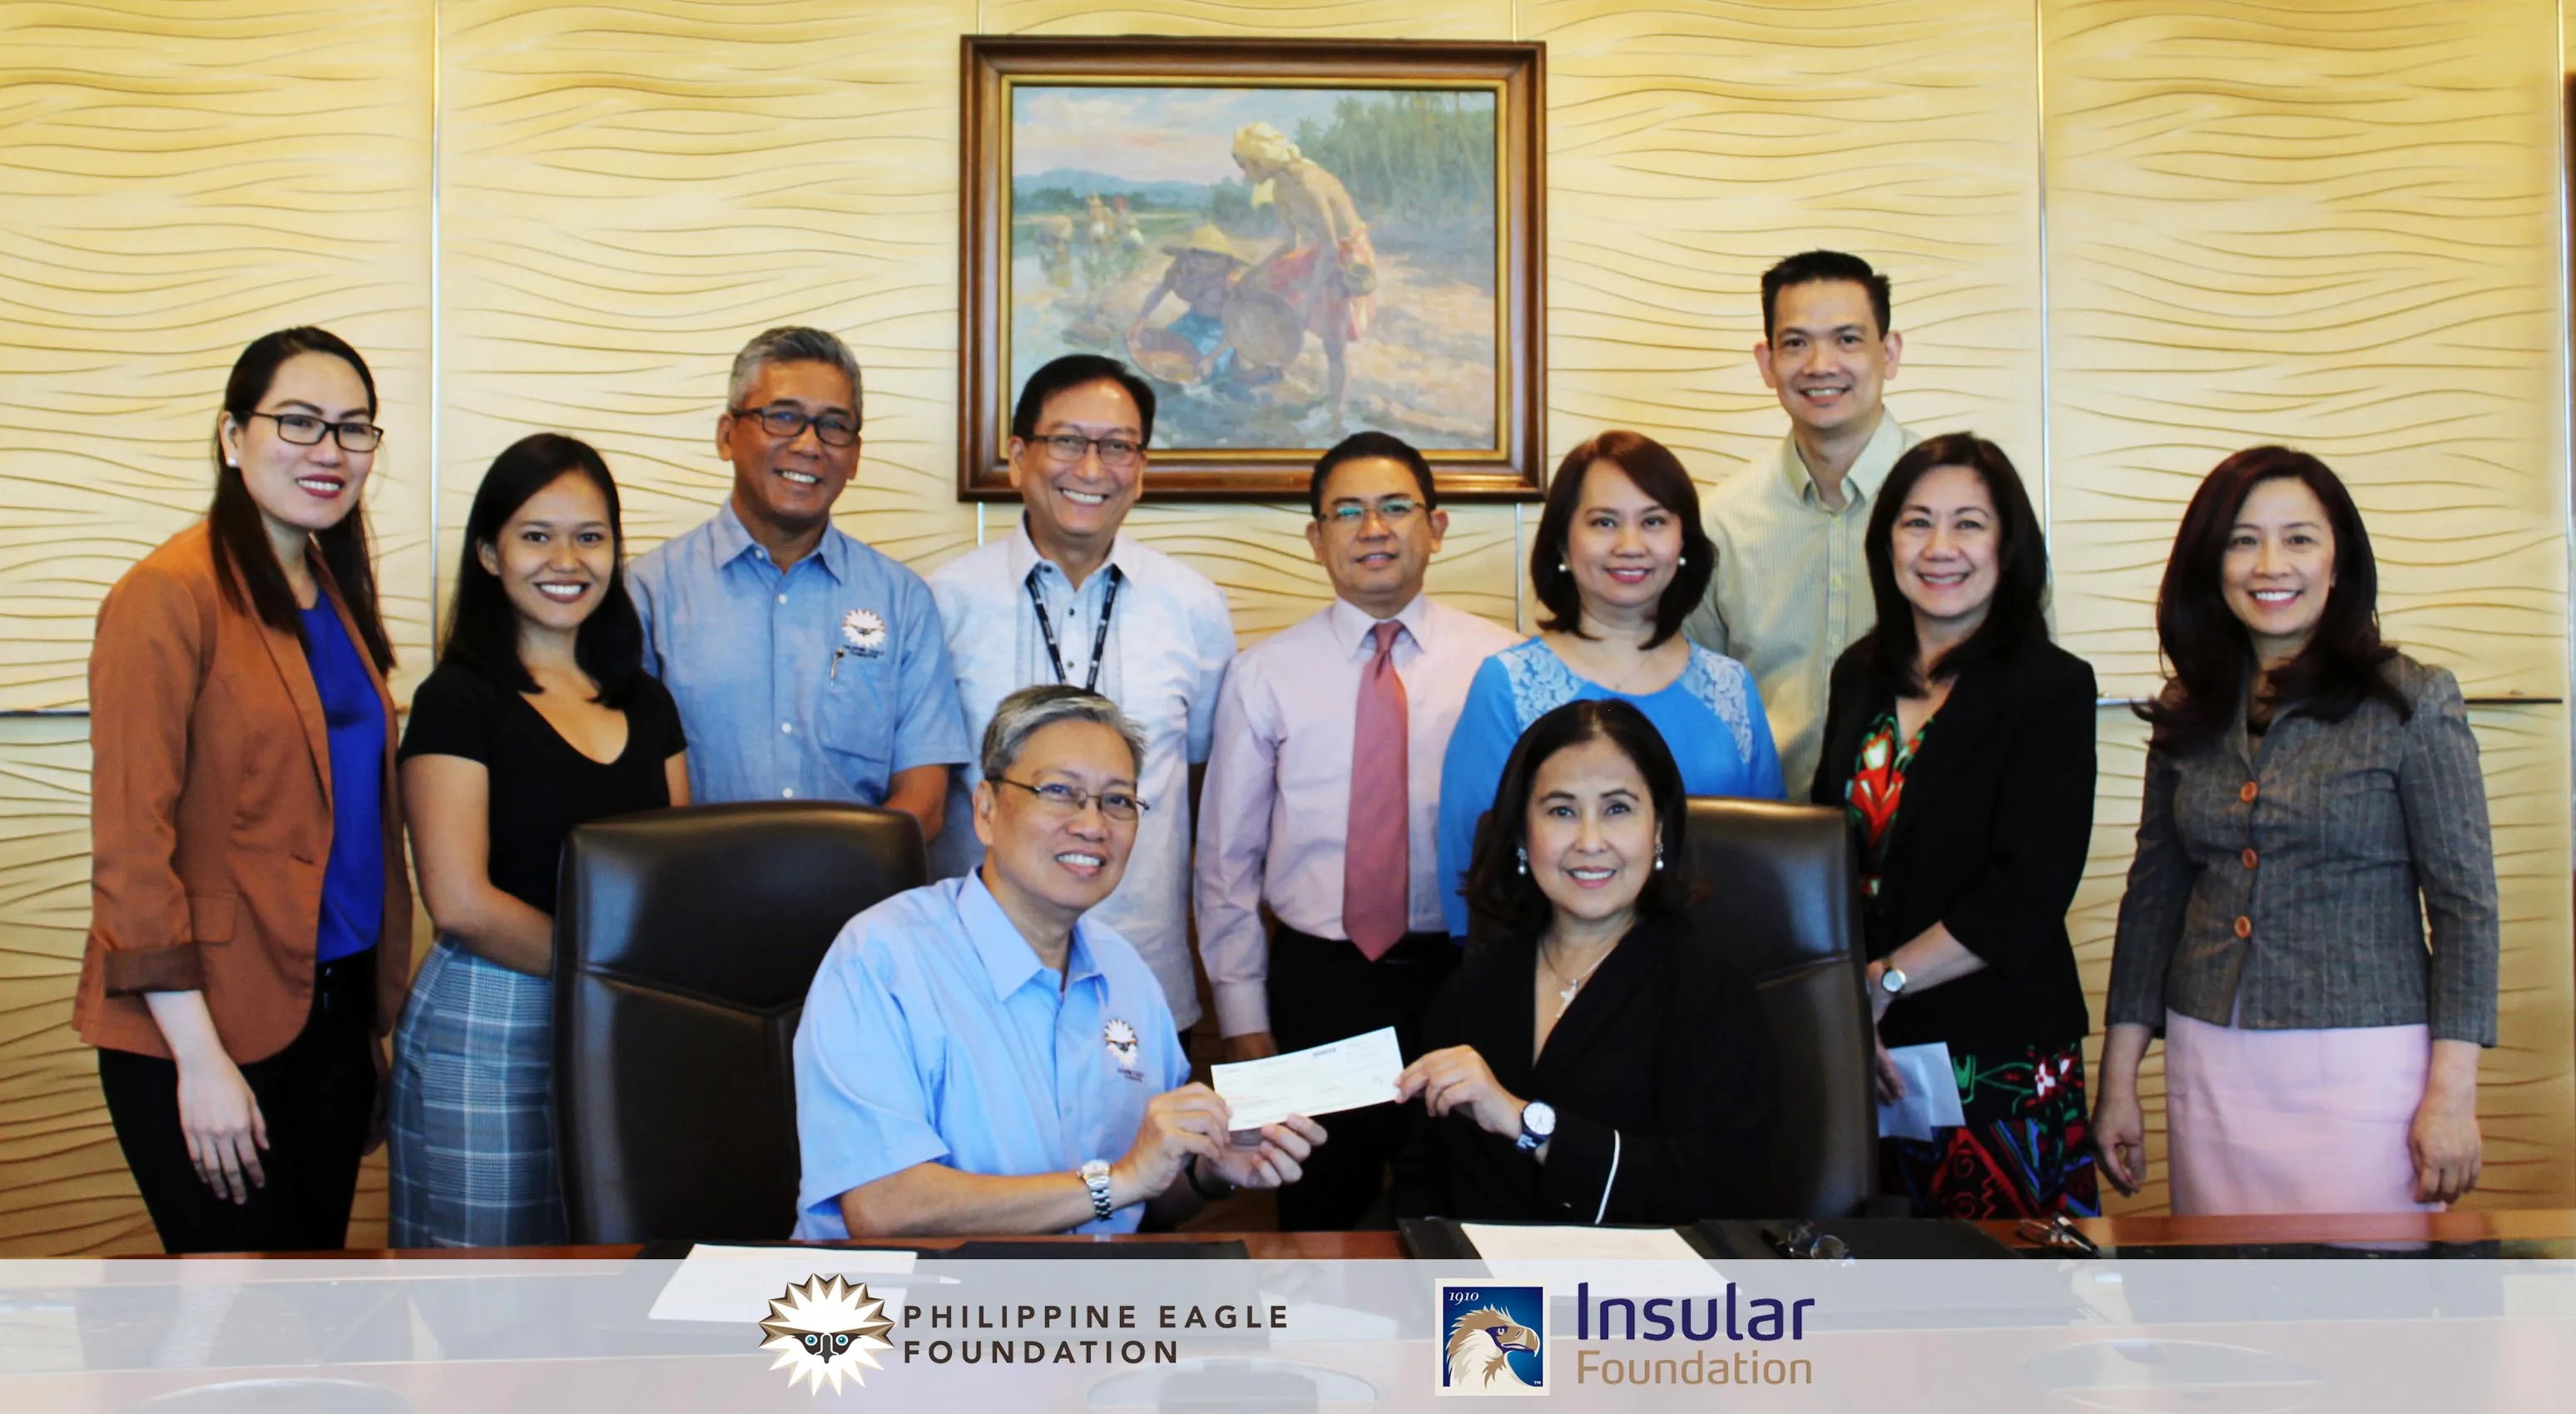 insular-foundation-renews-support-for-philippine-eagle-foundation